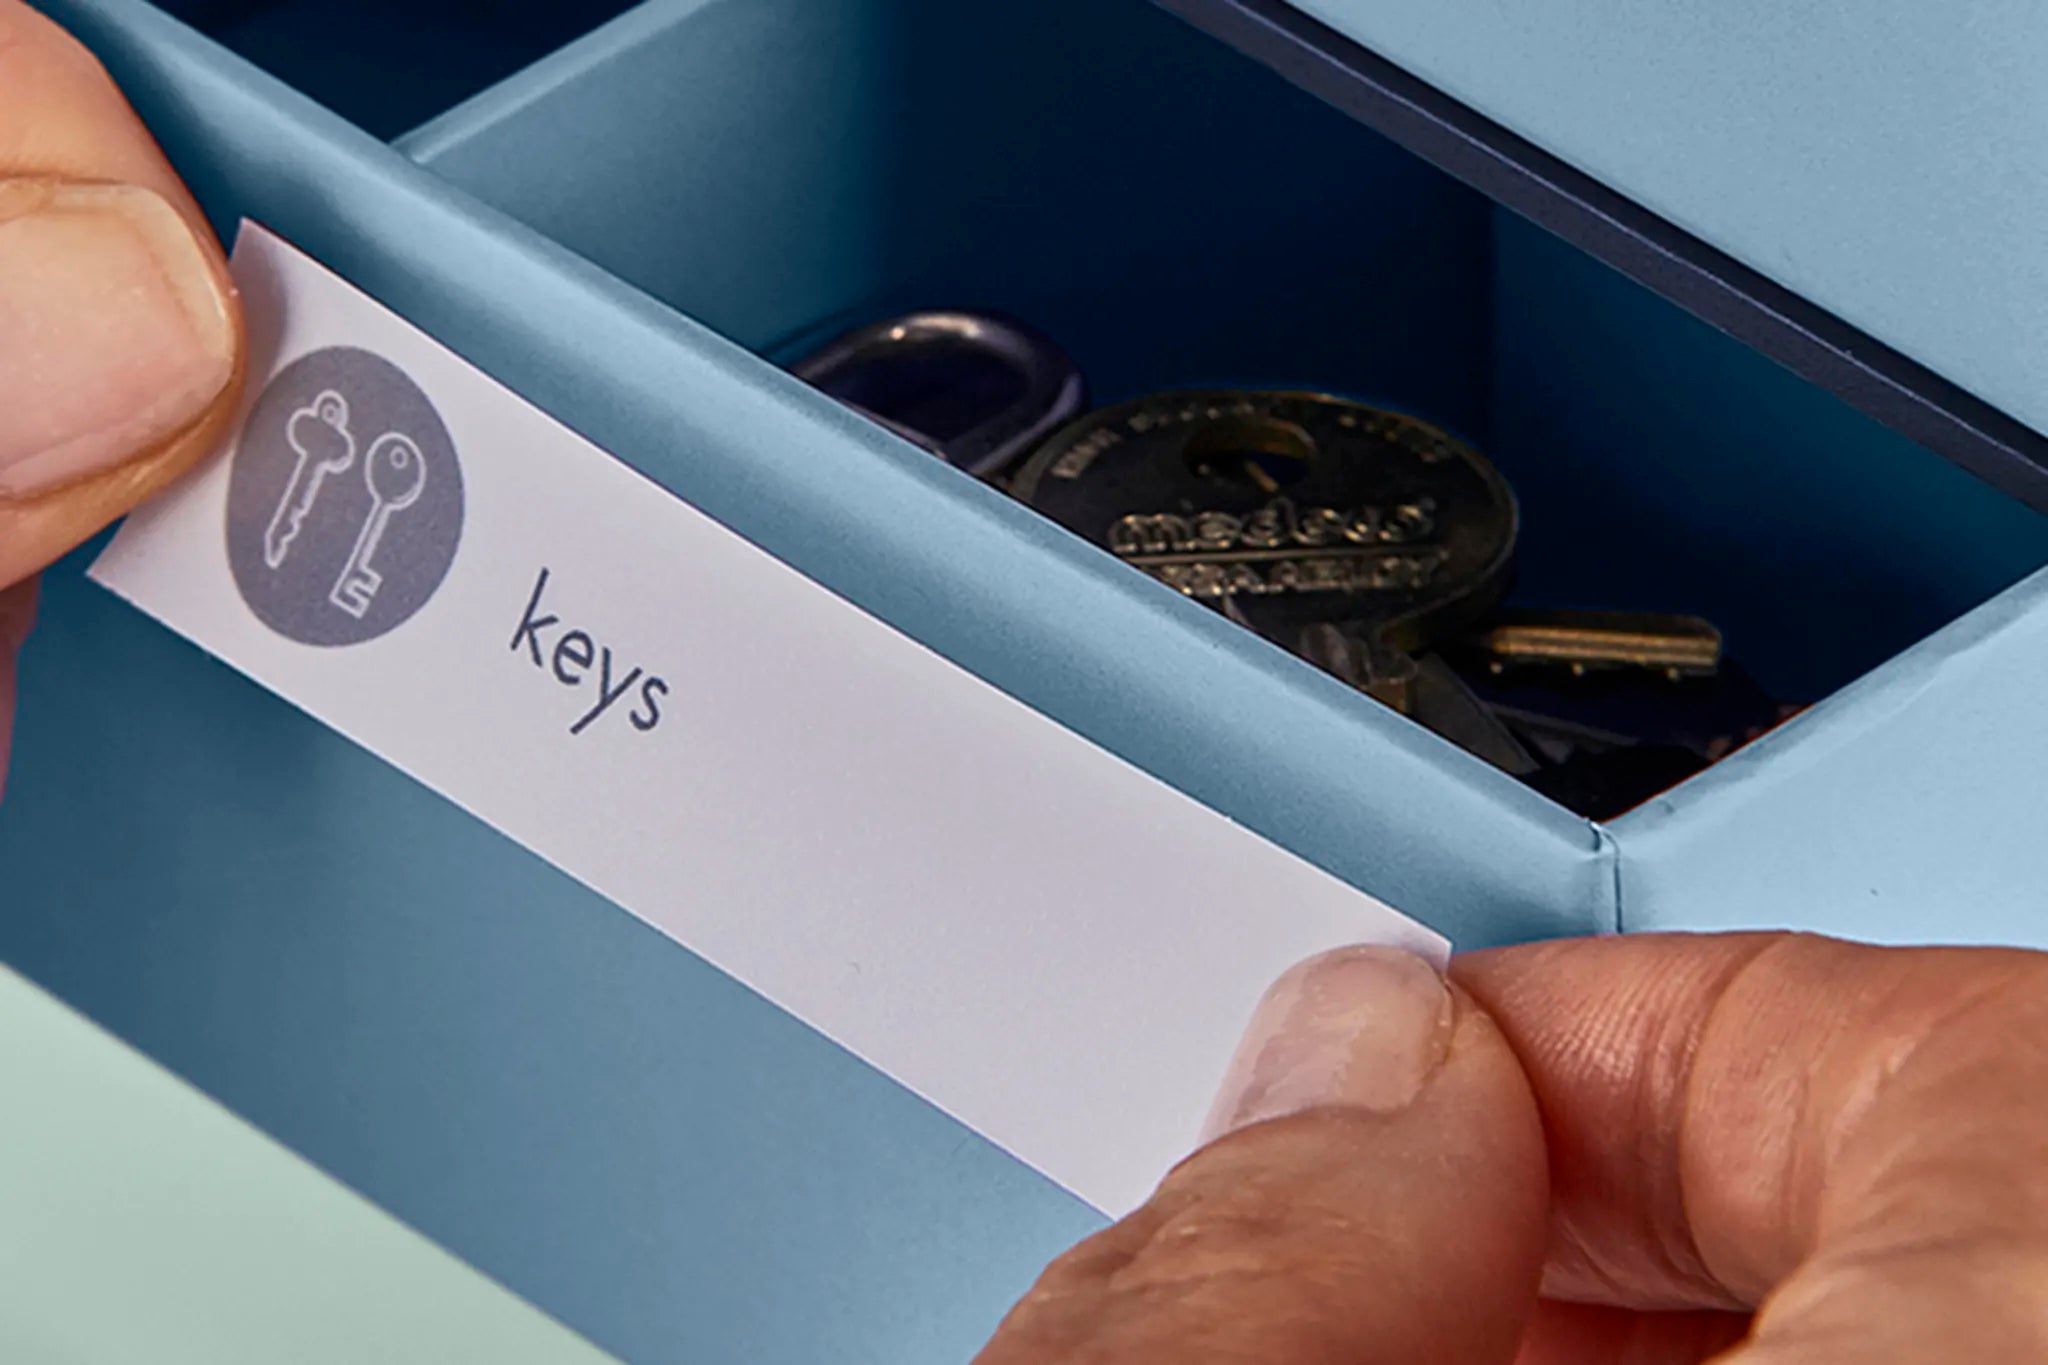 close up shot of an open something blue drawer and someone applying a label